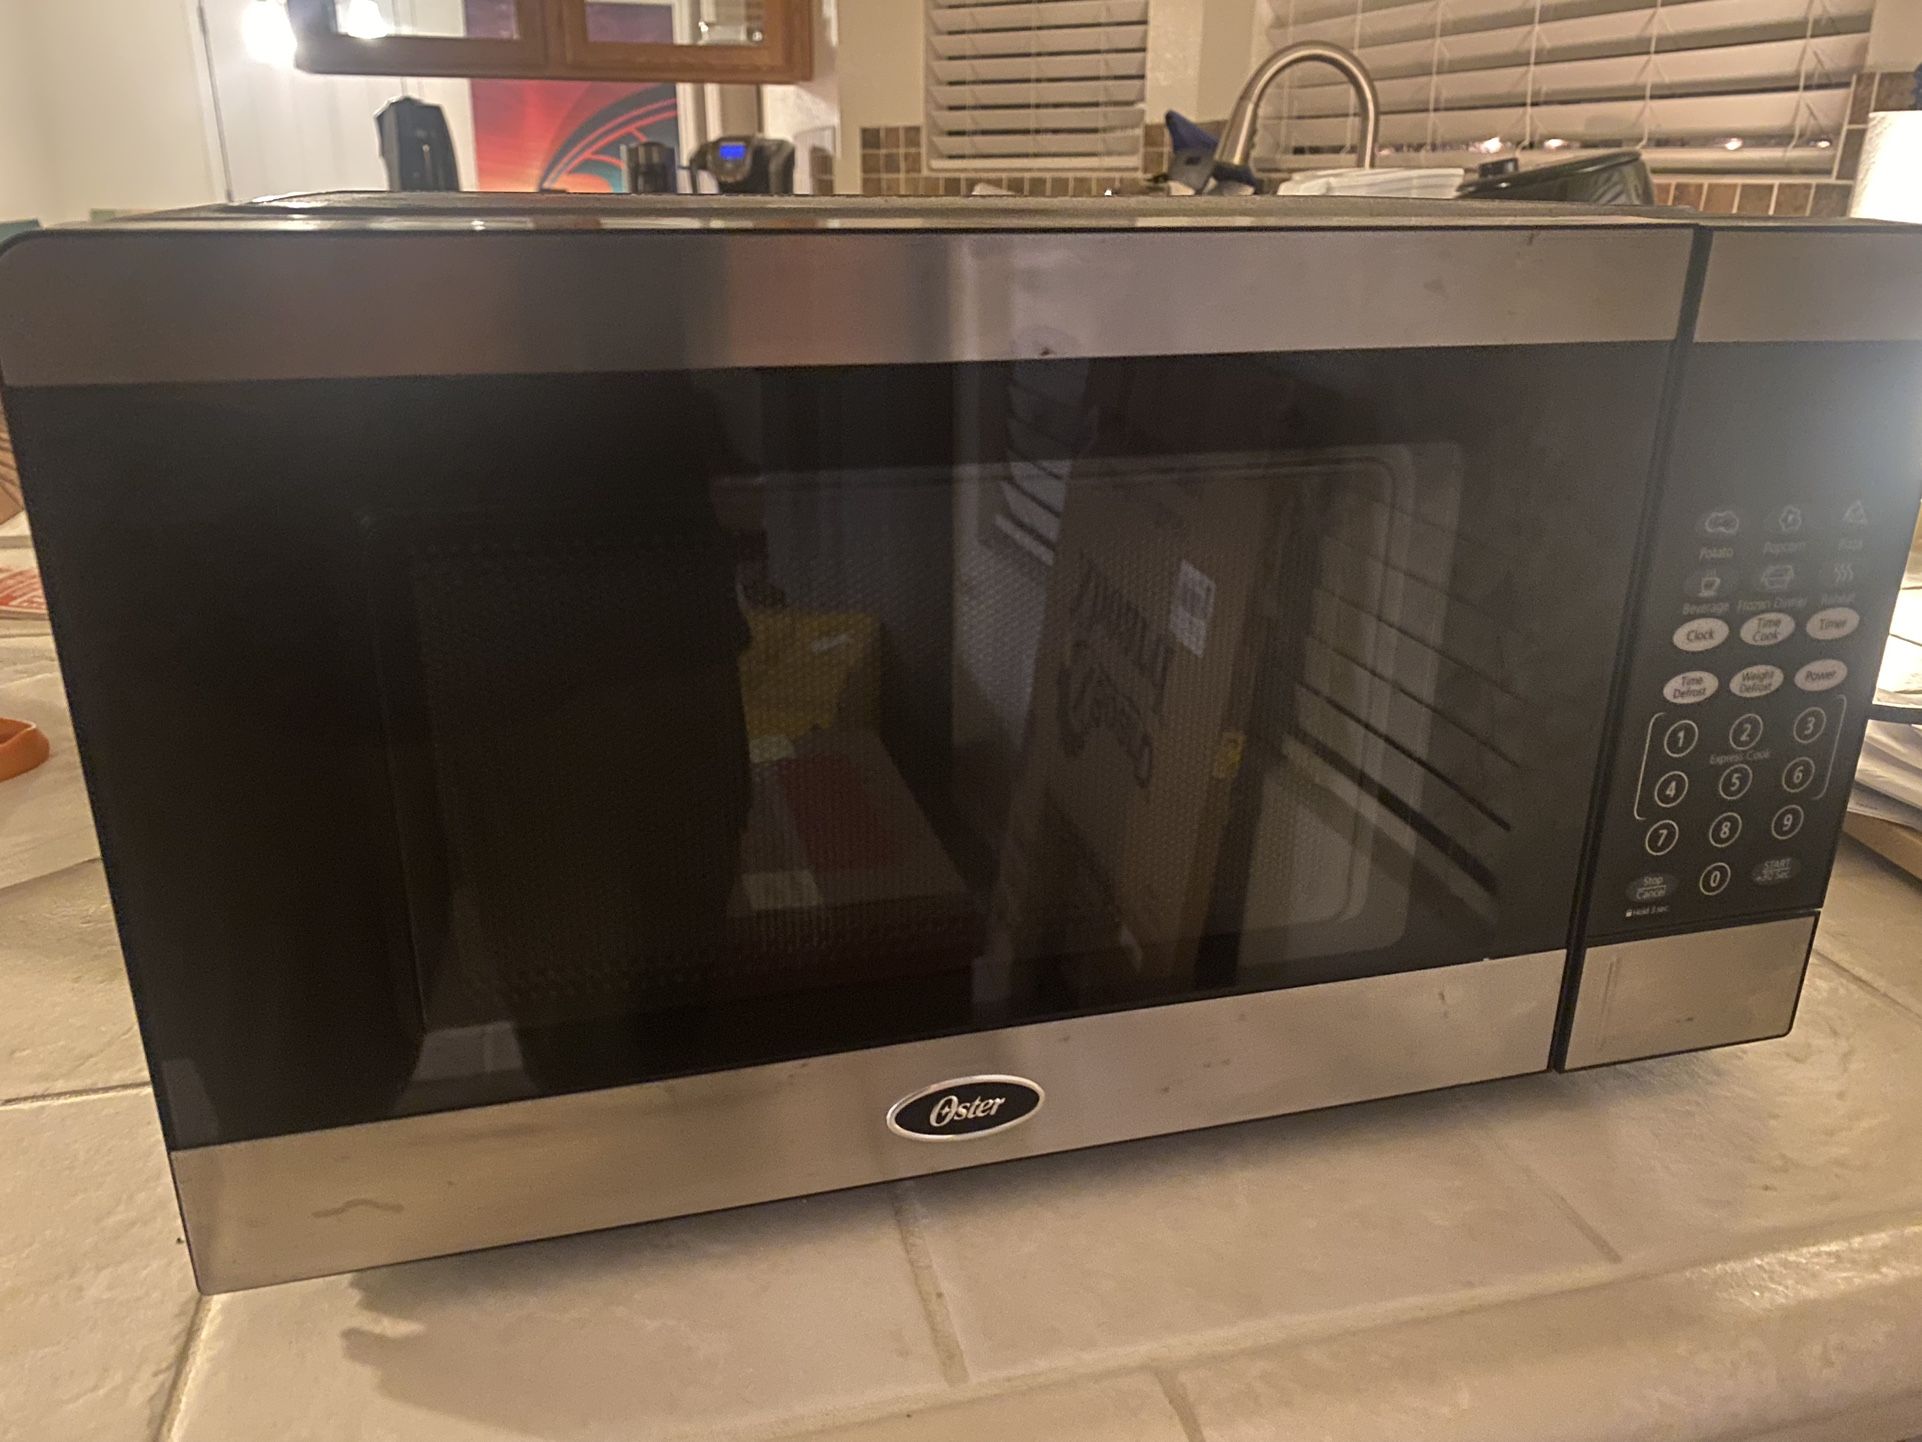 Microwave - FREE! (Works great!)